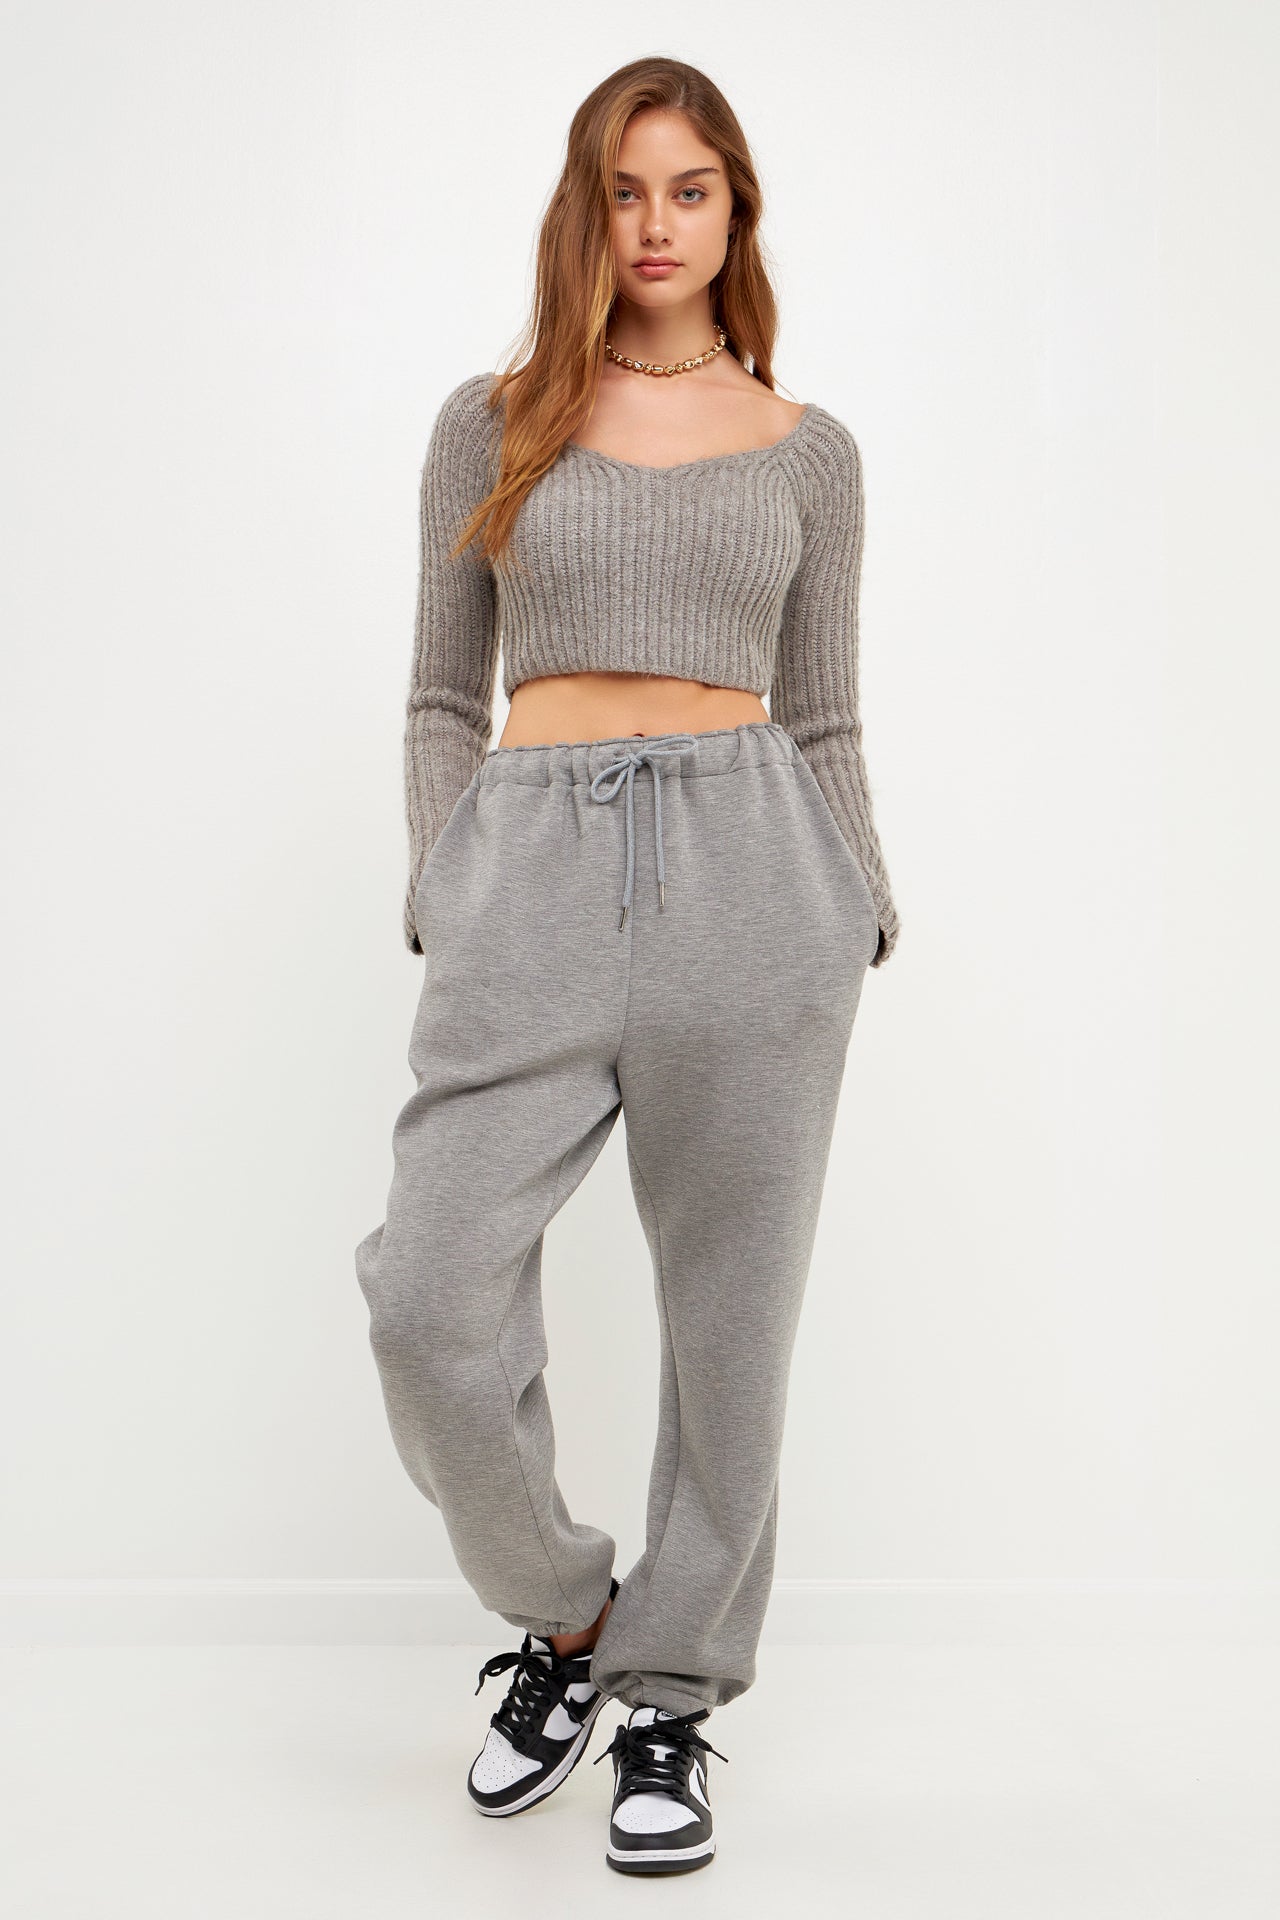 GREY LAB - Scuba Joggers - LOUNGE WEAR available at Objectrare